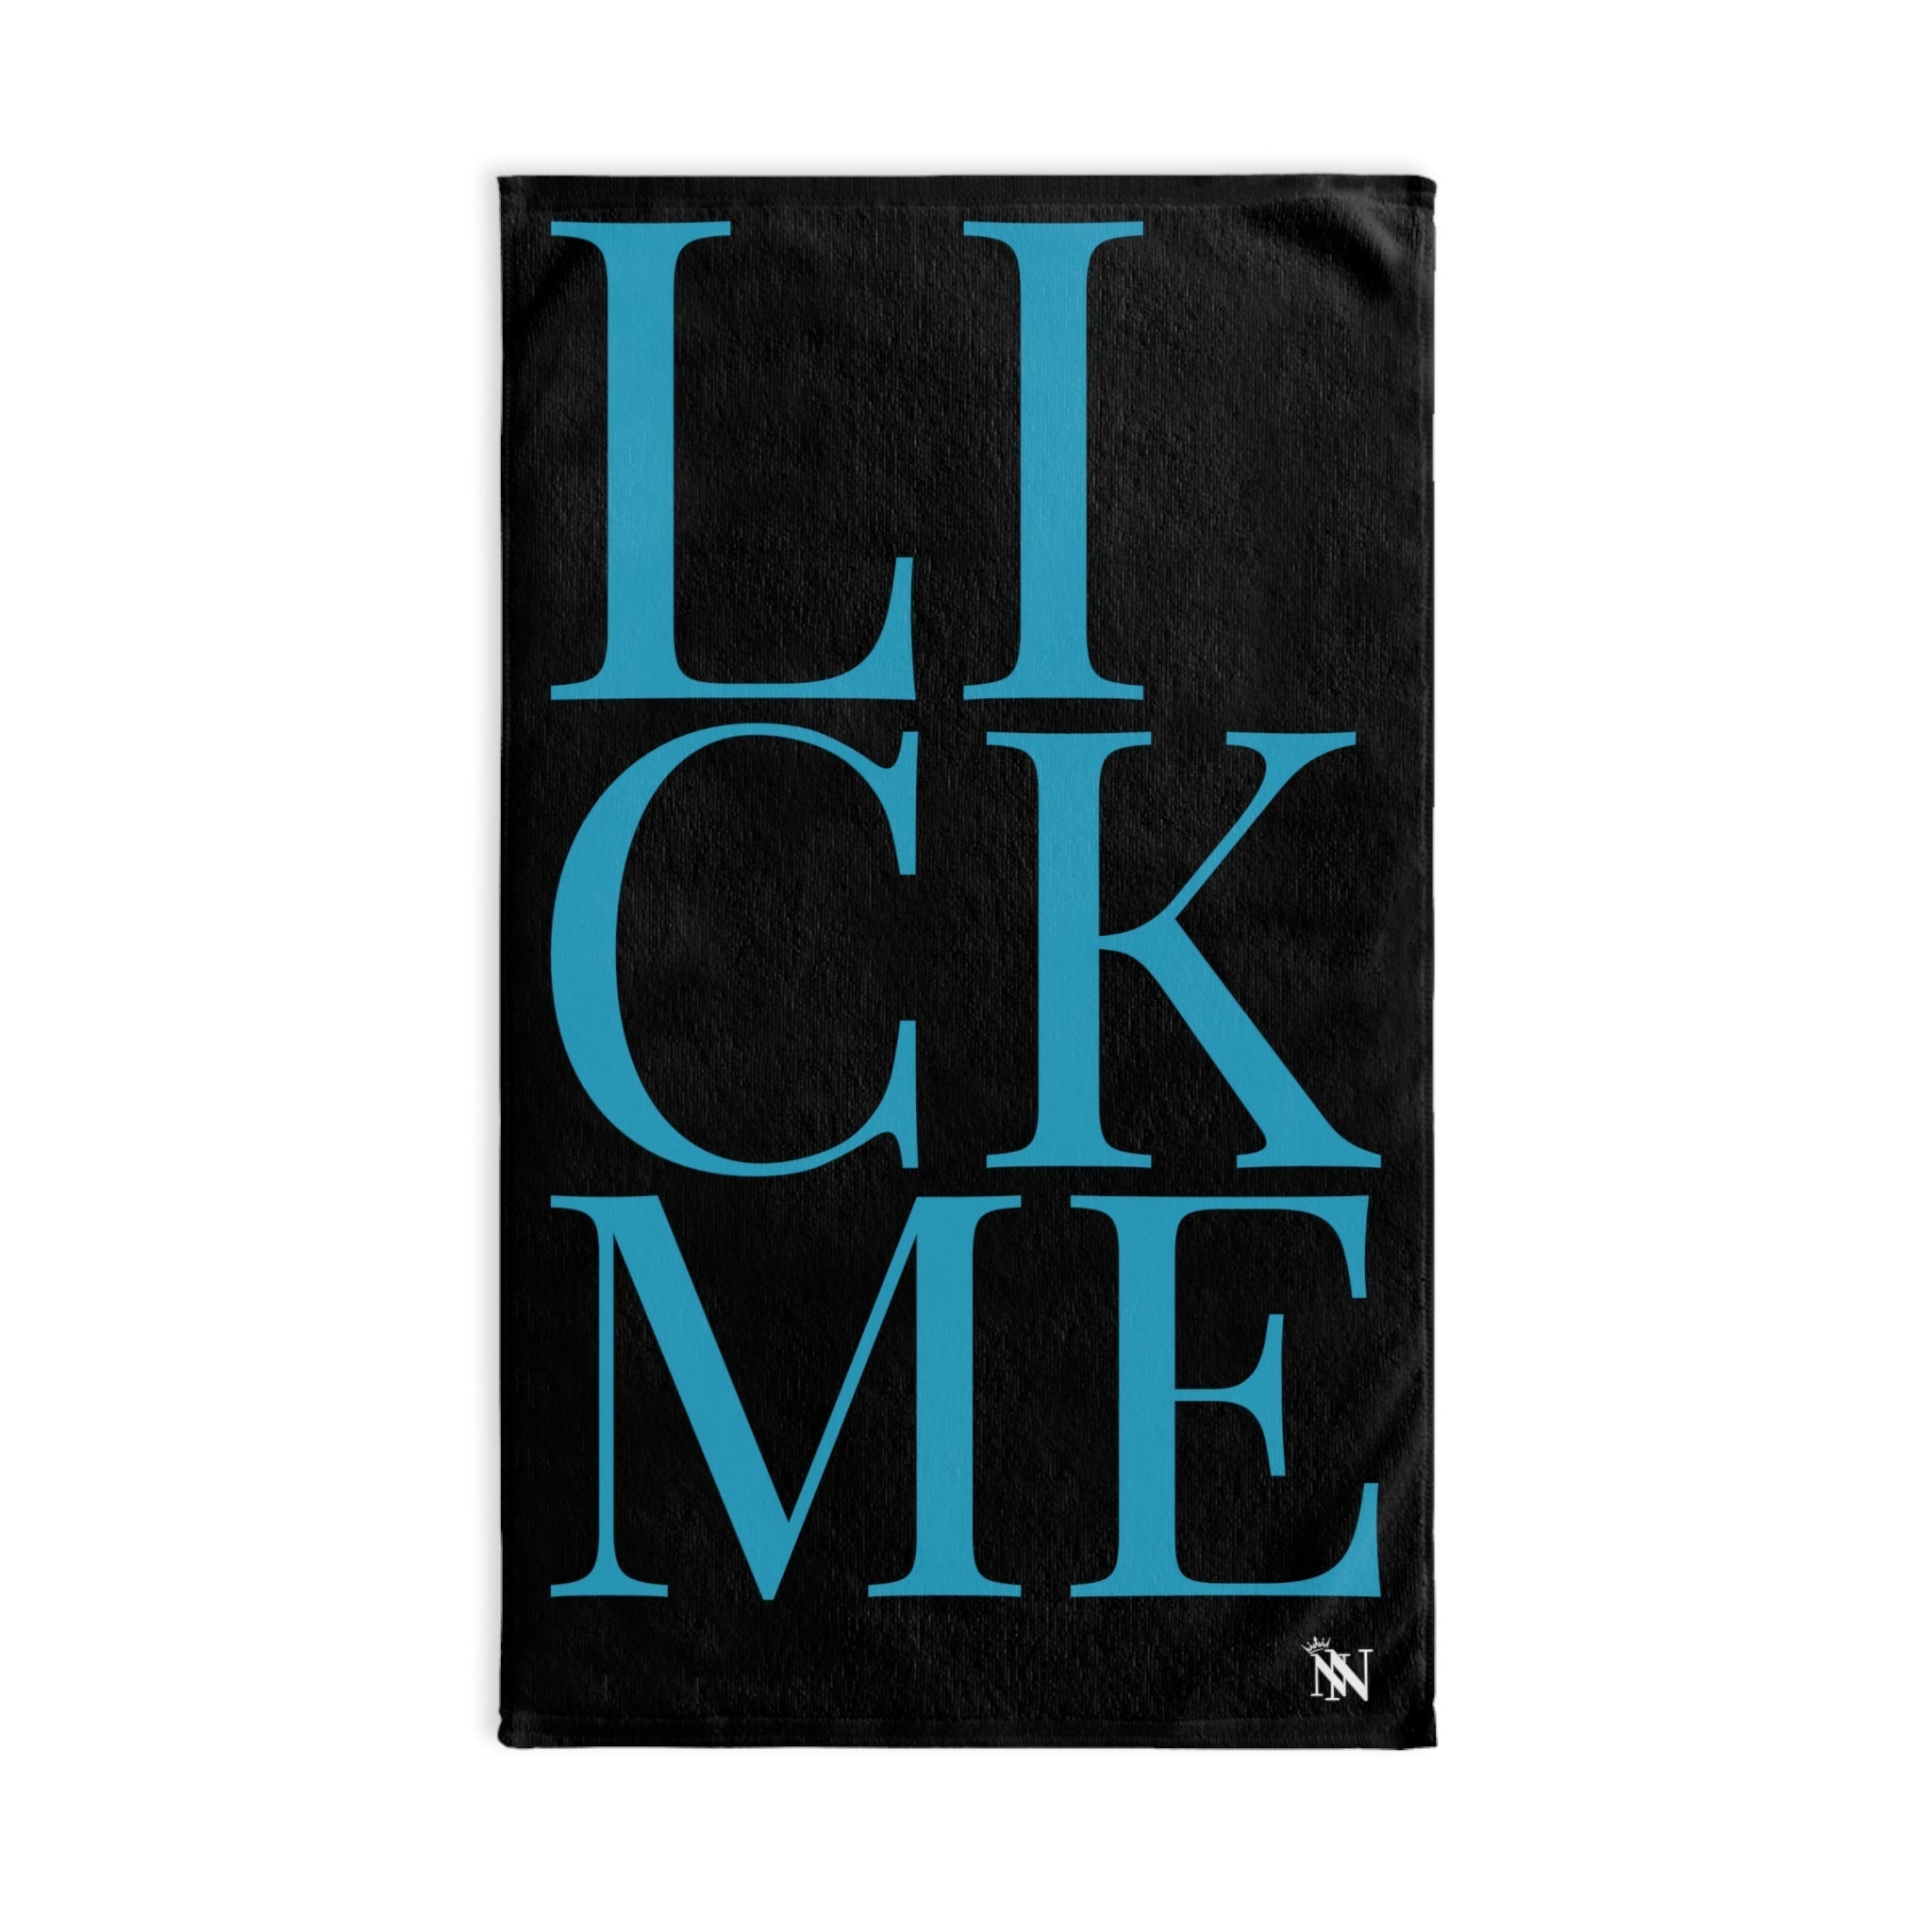 Lick Me Teal Black | Sexy Gifts for Boyfriend, Funny Towel Romantic Gift for Wedding Couple Fiance First Year 2nd Anniversary Valentines, Party Gag Gifts, Joke Humor Cloth for Husband Men BF NECTAR NAPKINS